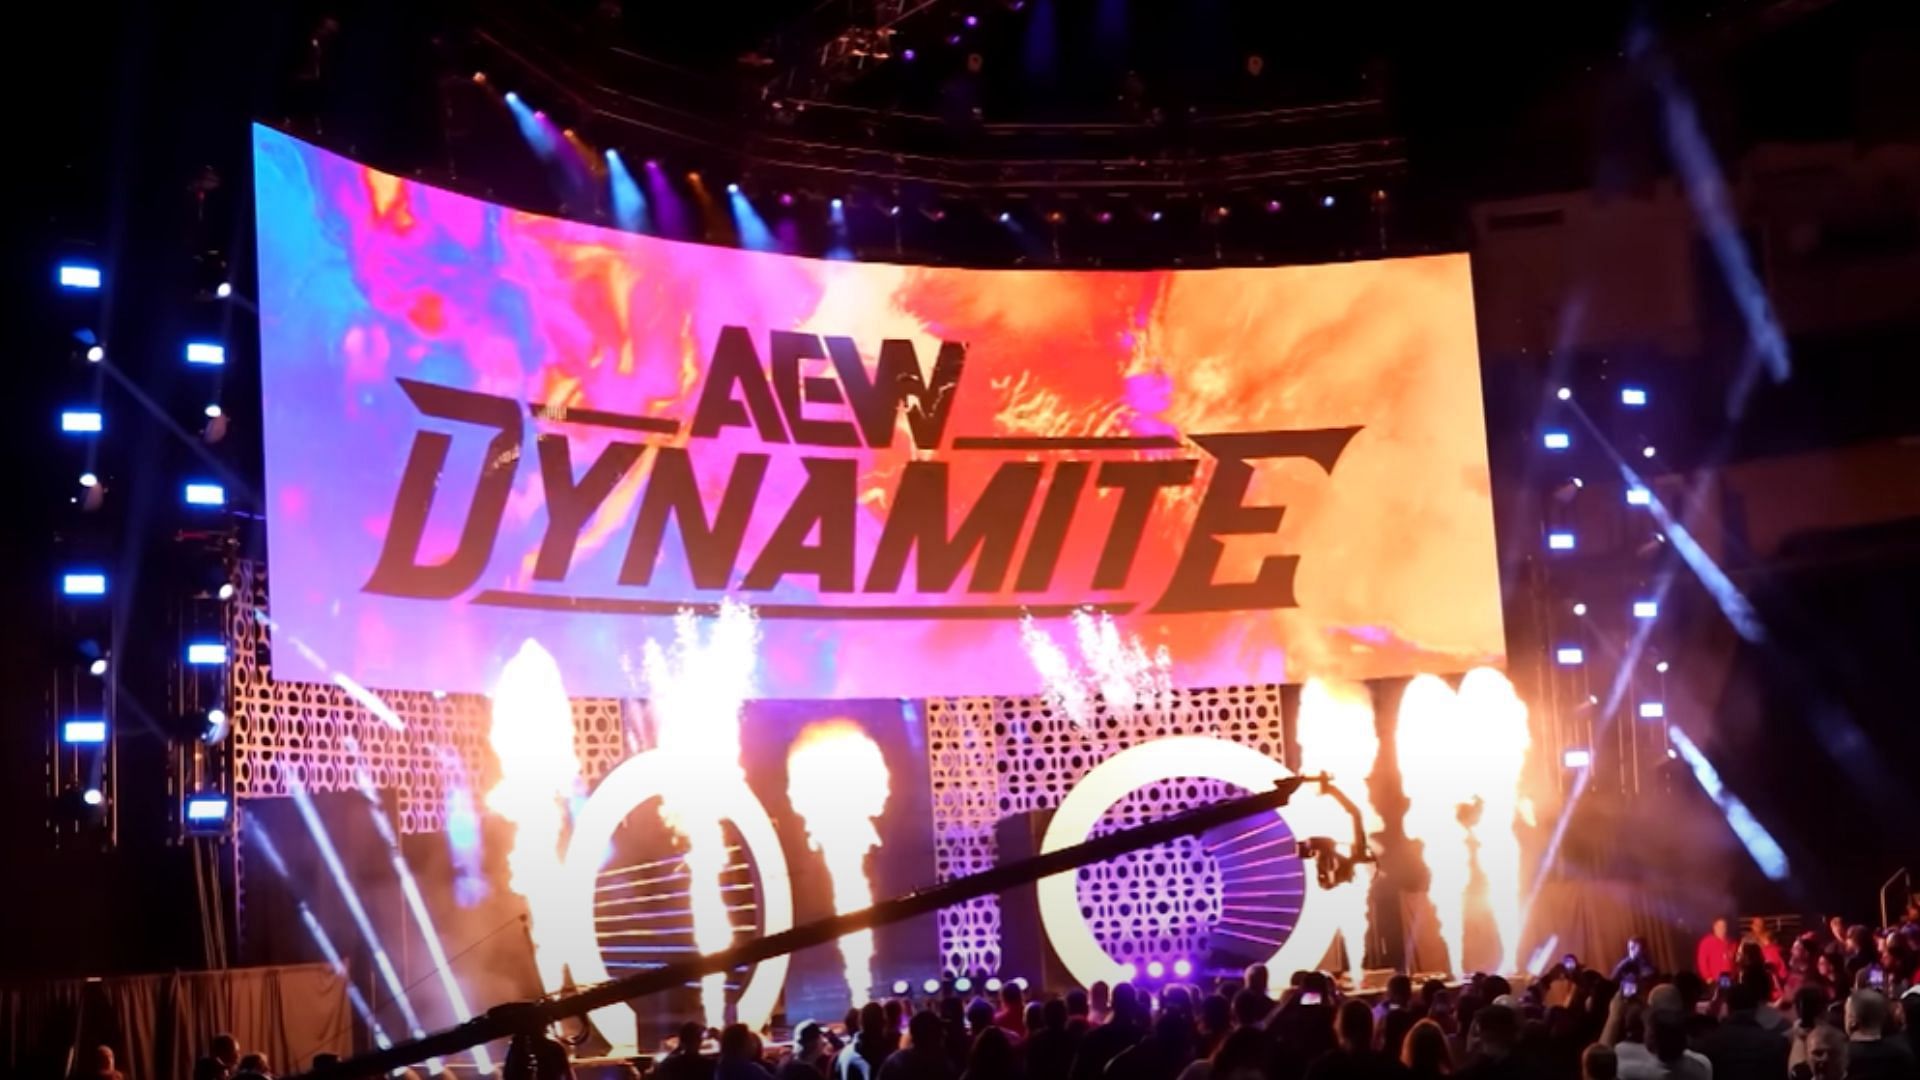 AEW is home to some of the best wrestlers in the world [Image Credits: AEW